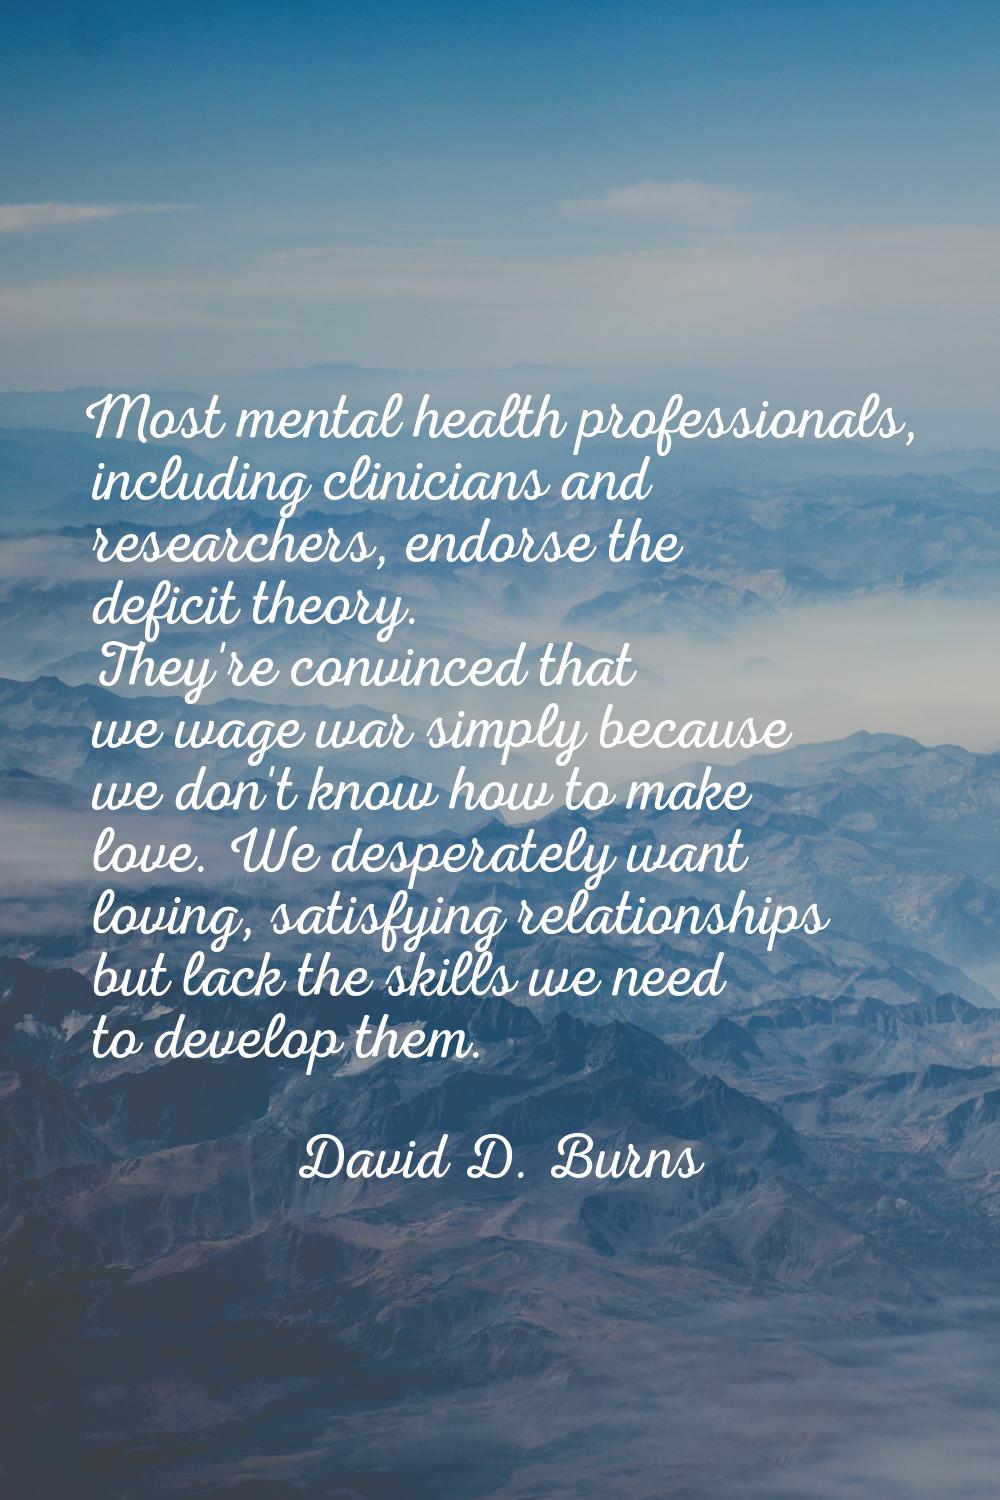 Most mental health professionals, including clinicians and researchers, endorse the deficit theory.